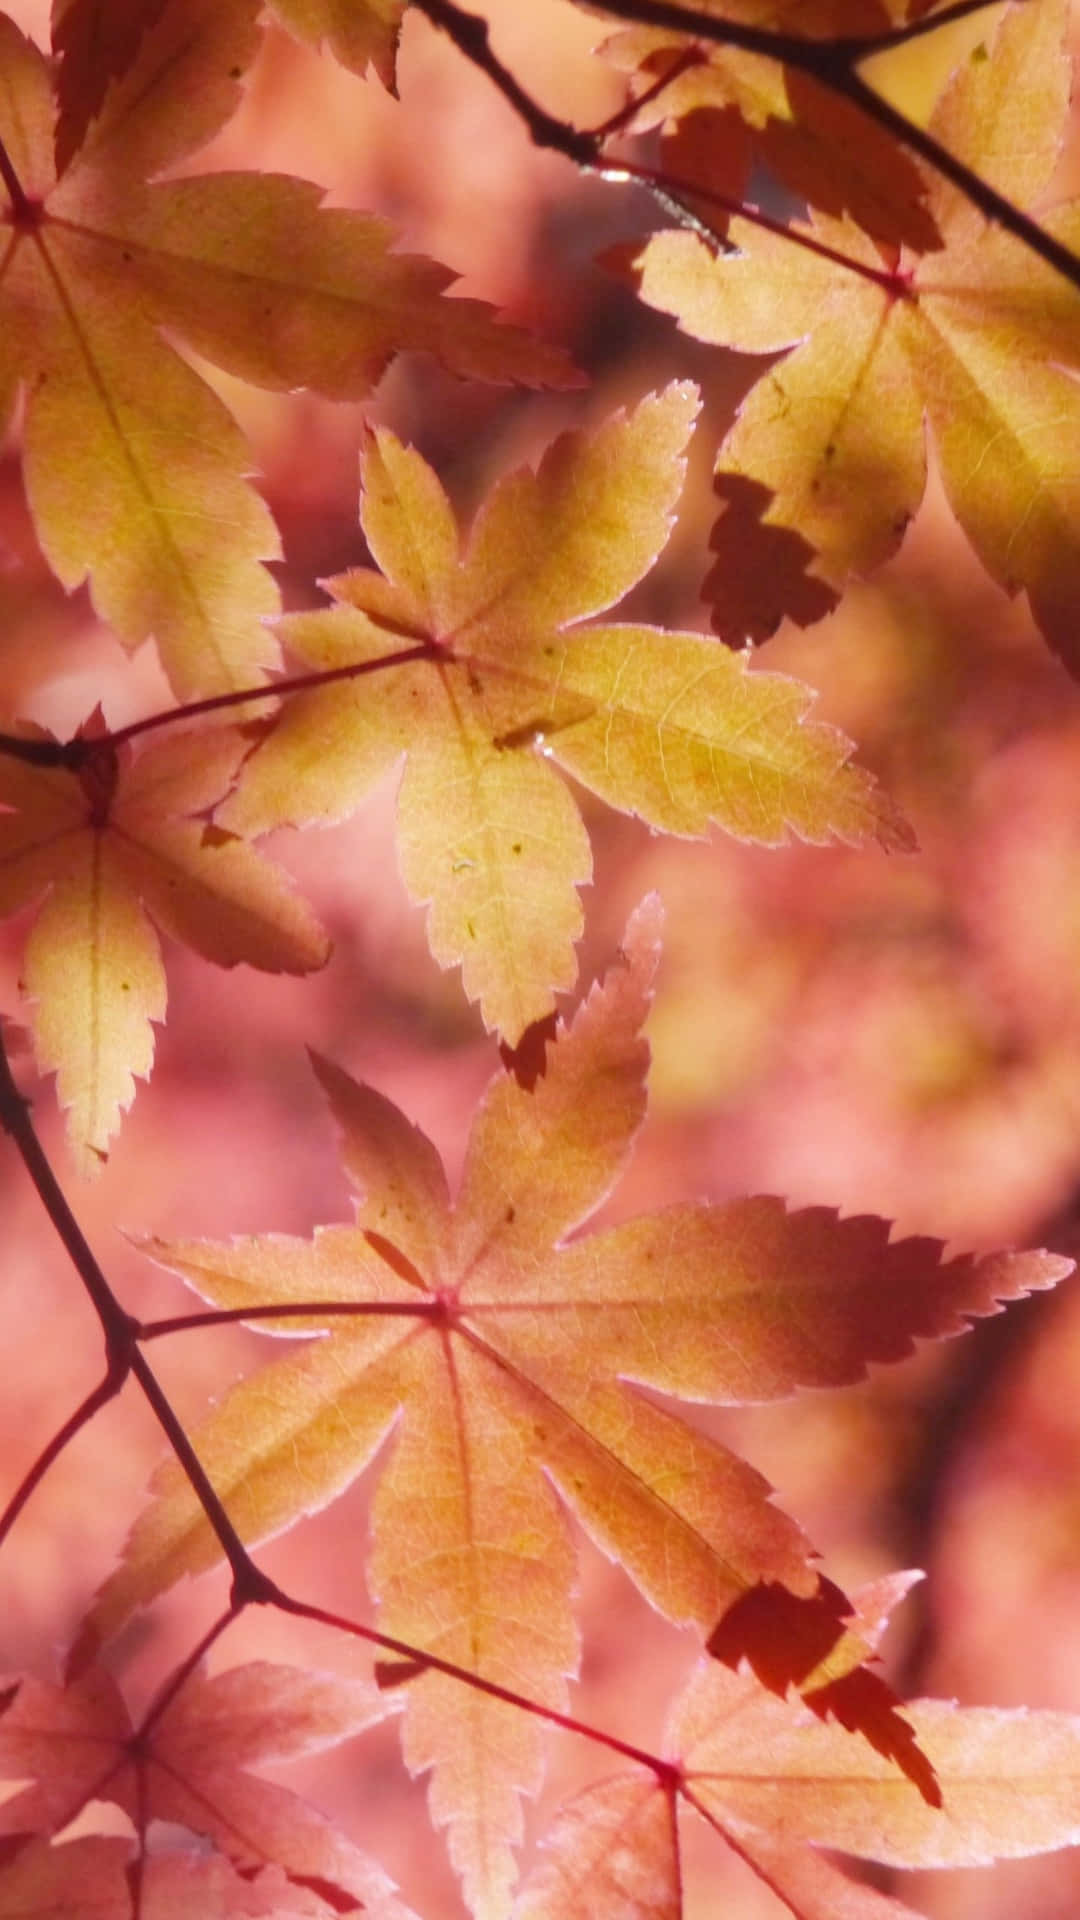 Get creative in capturing the Autumn vibes with an Autumn Leaves Phone Wallpaper